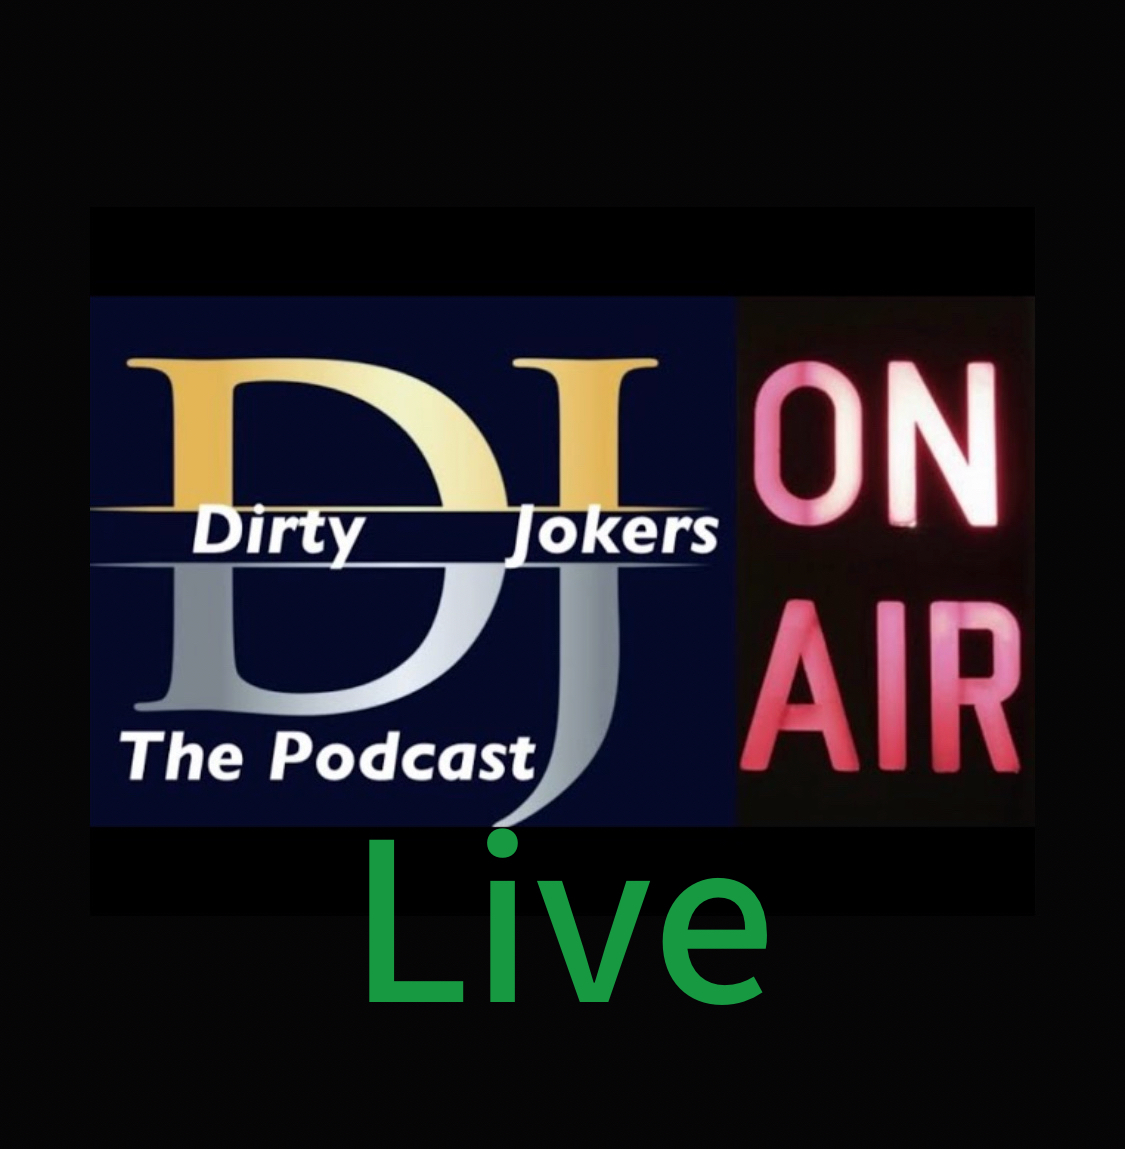 Dirty Jokers Podcast